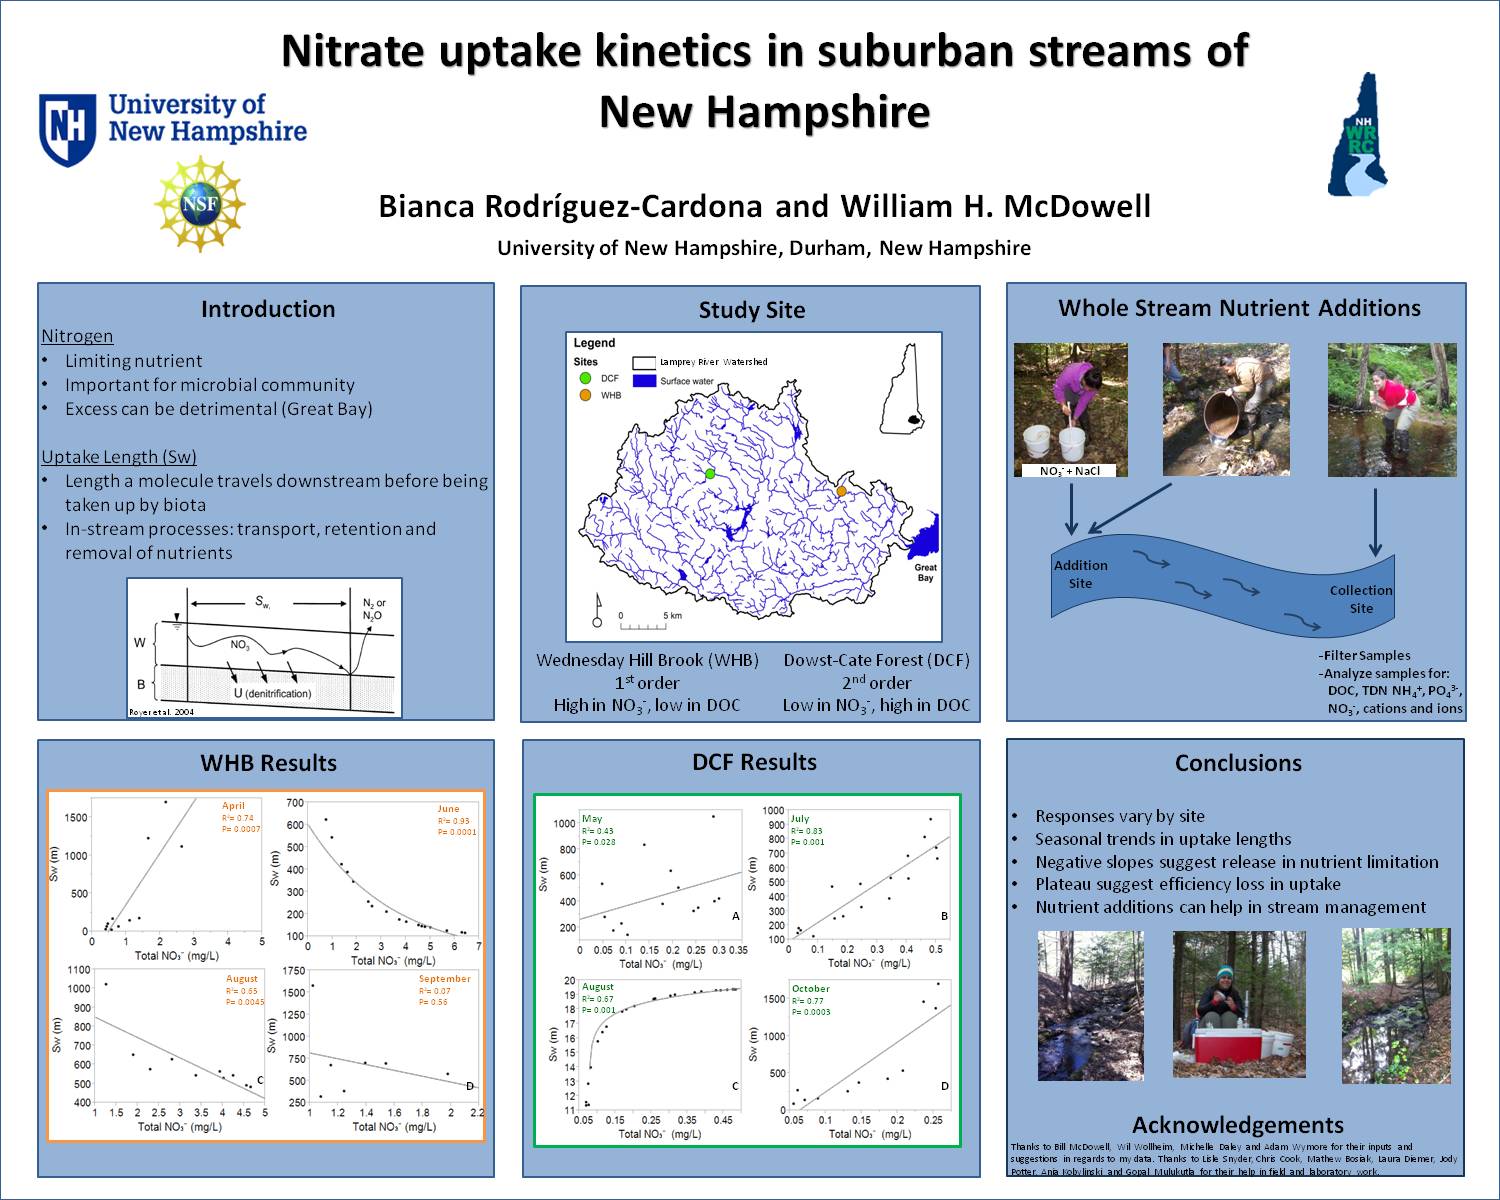 Nitrate Uptake Kinetics In Suburban Streams Of New Hampshire by bpq33